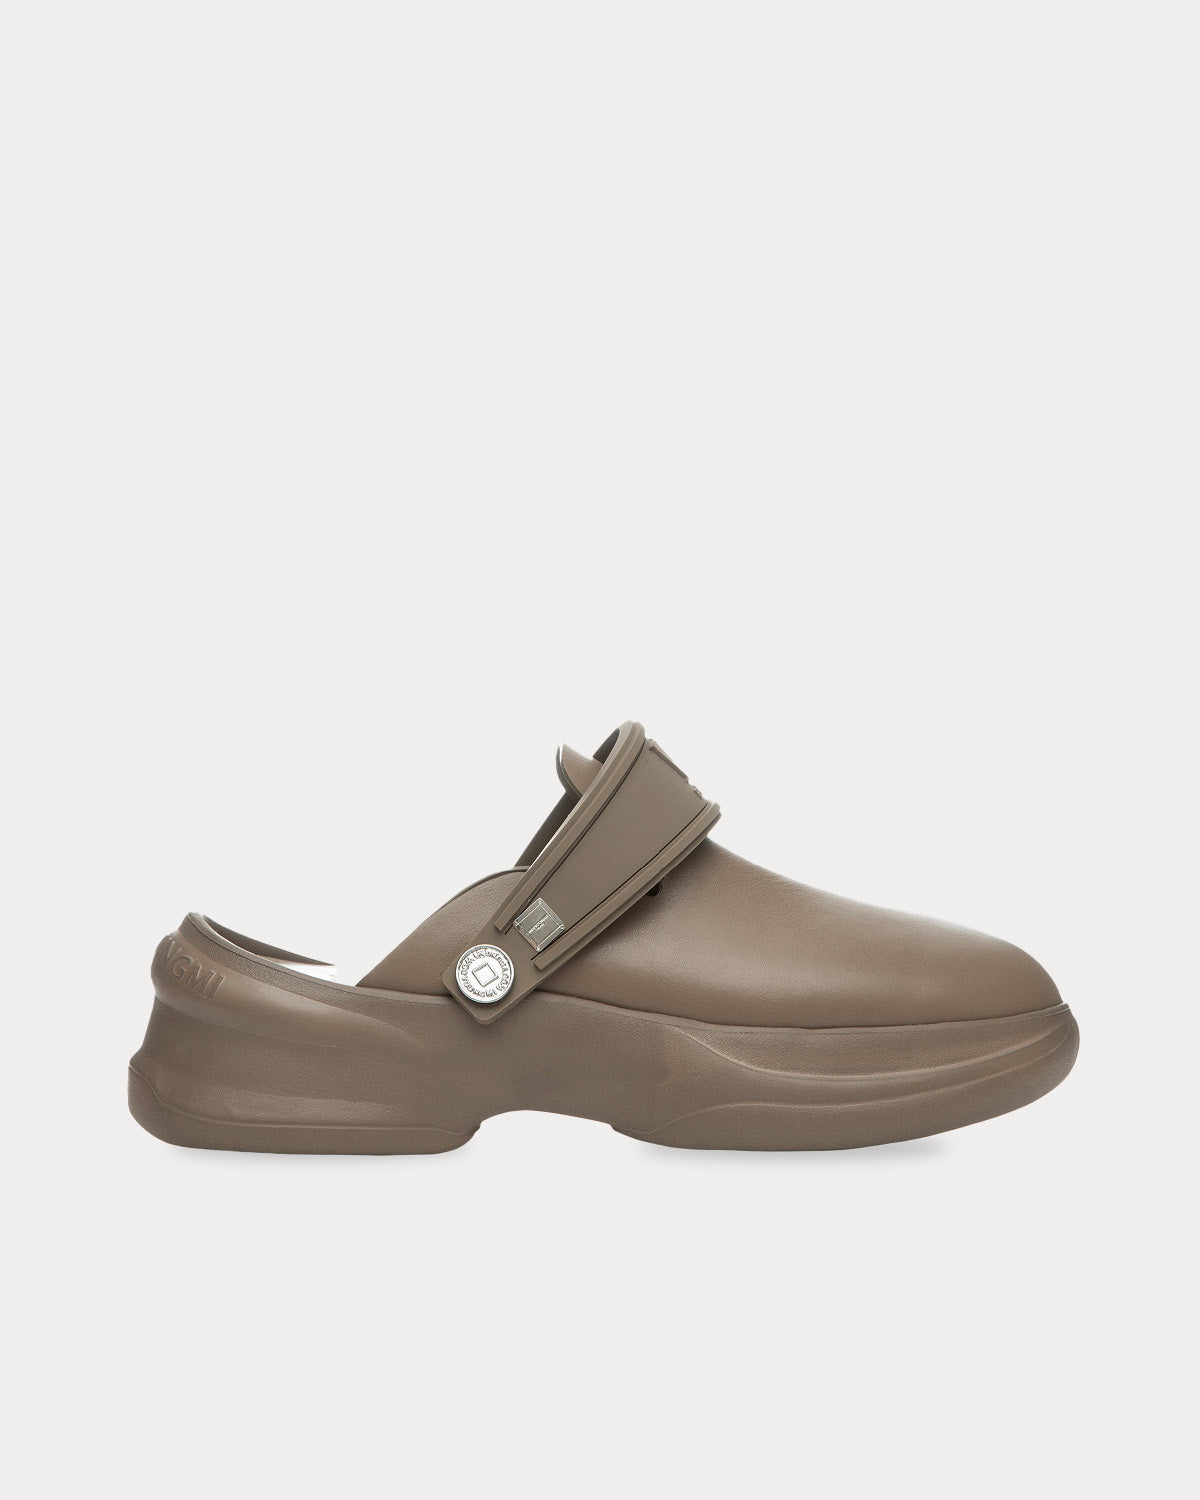 Wooyoungmi - Slingback Leather Beige Clogs